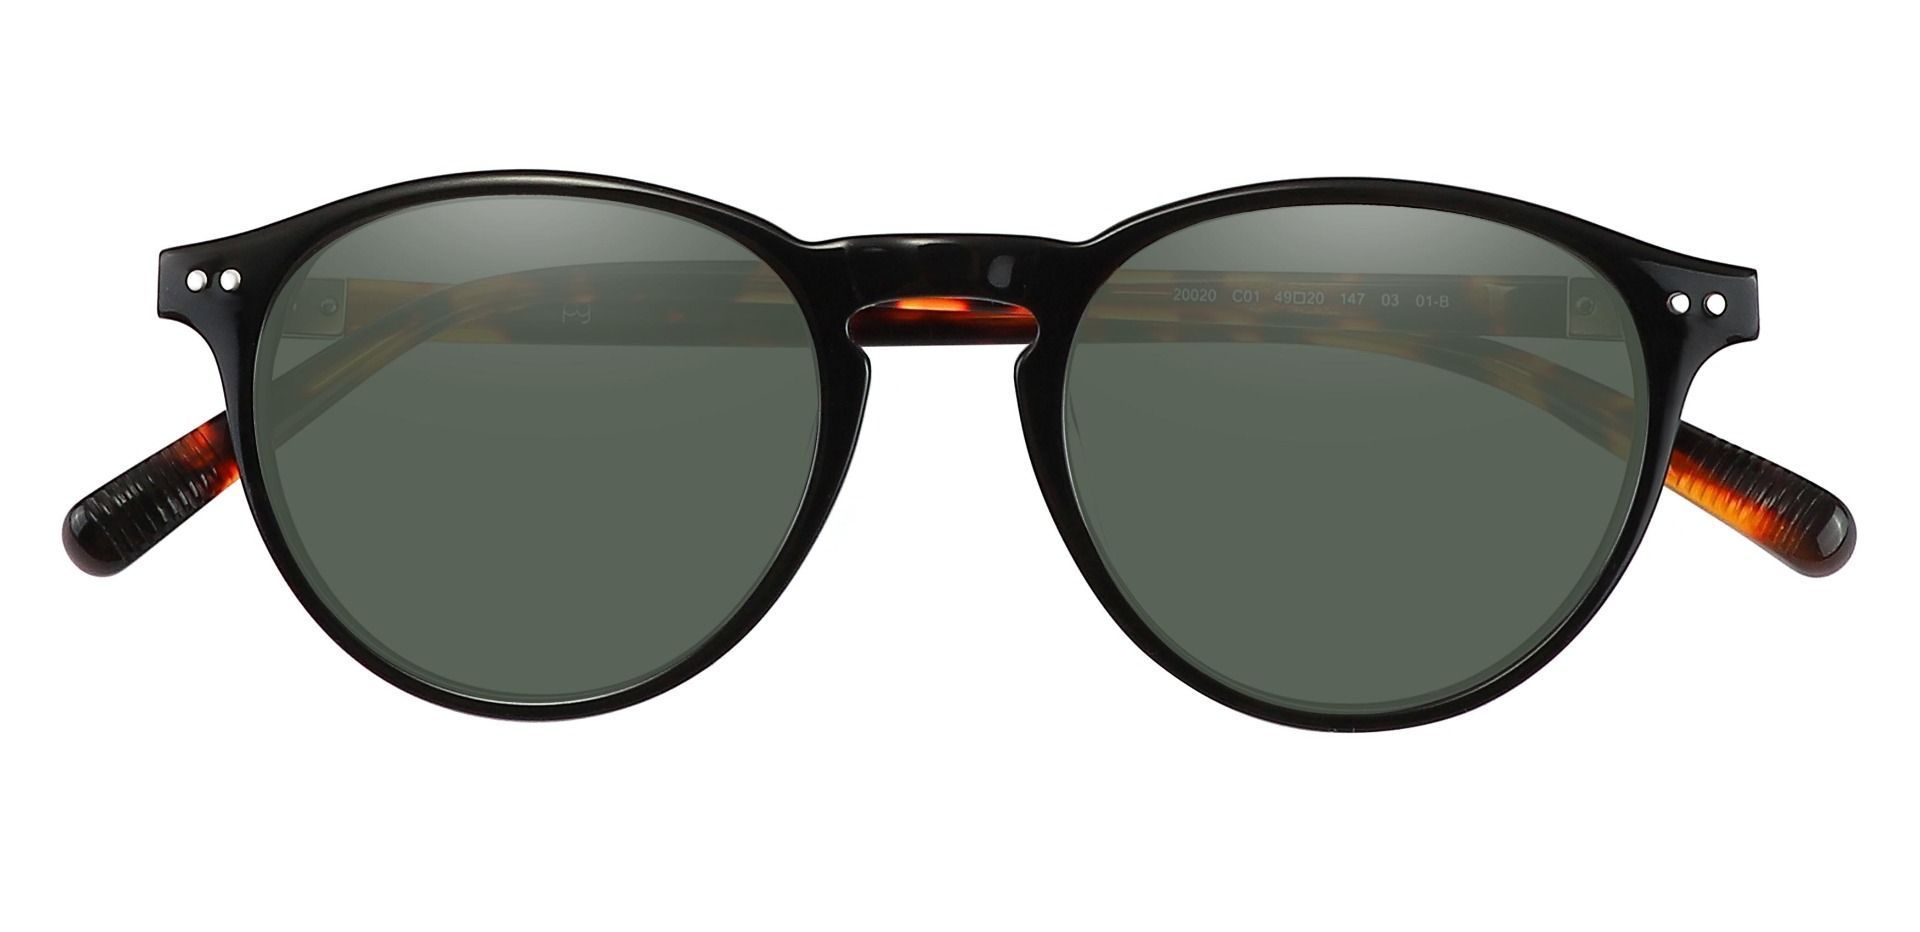 Monarch Oval Non-Rx Sunglasses - Black Frame With Green Lenses